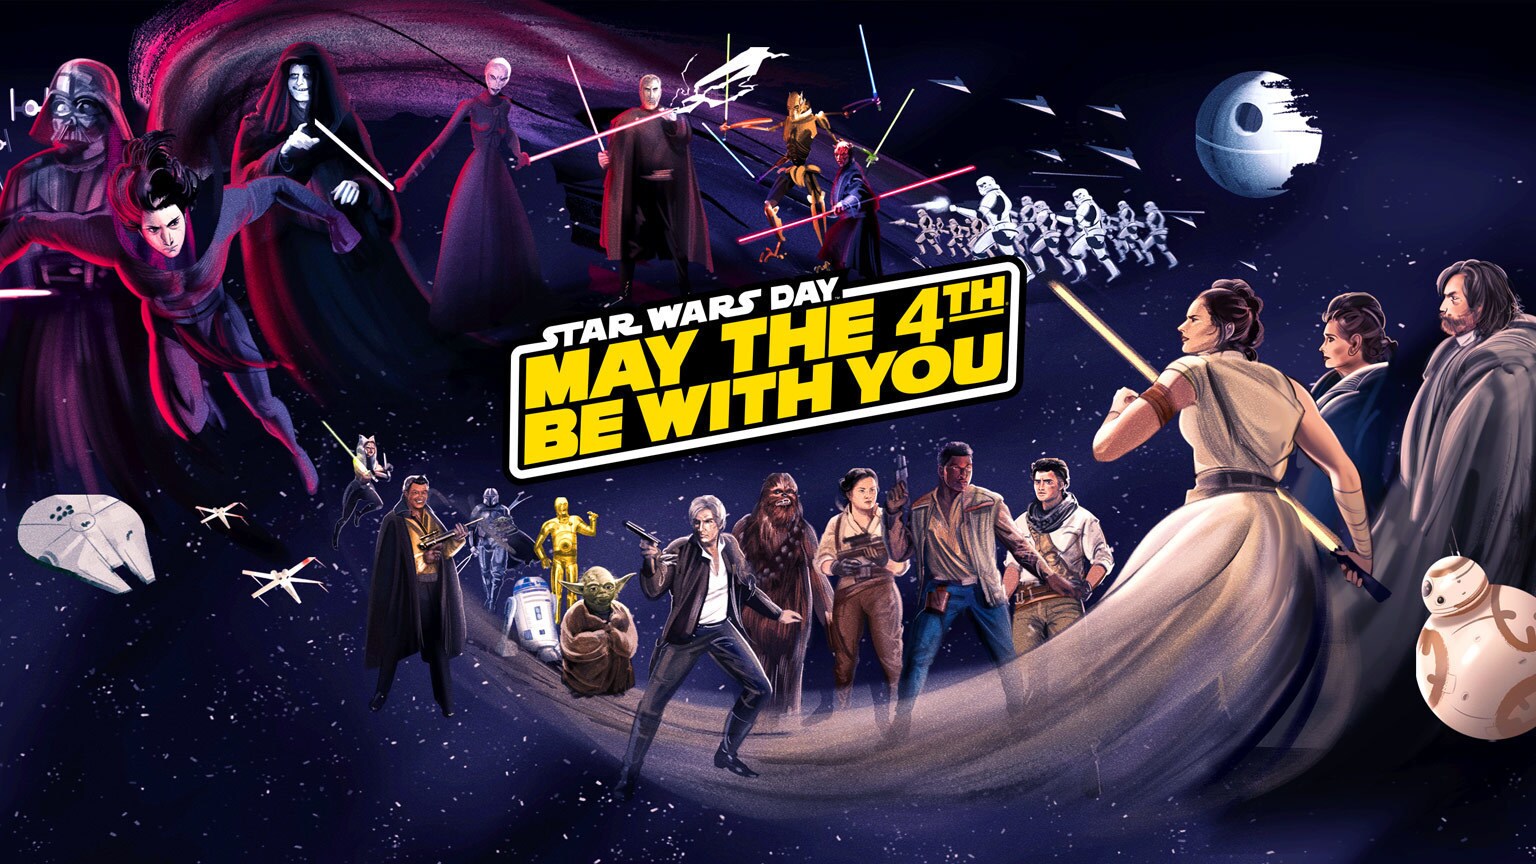 Disney+ to Celebrate Star Wars Day with Fan Art Takeover